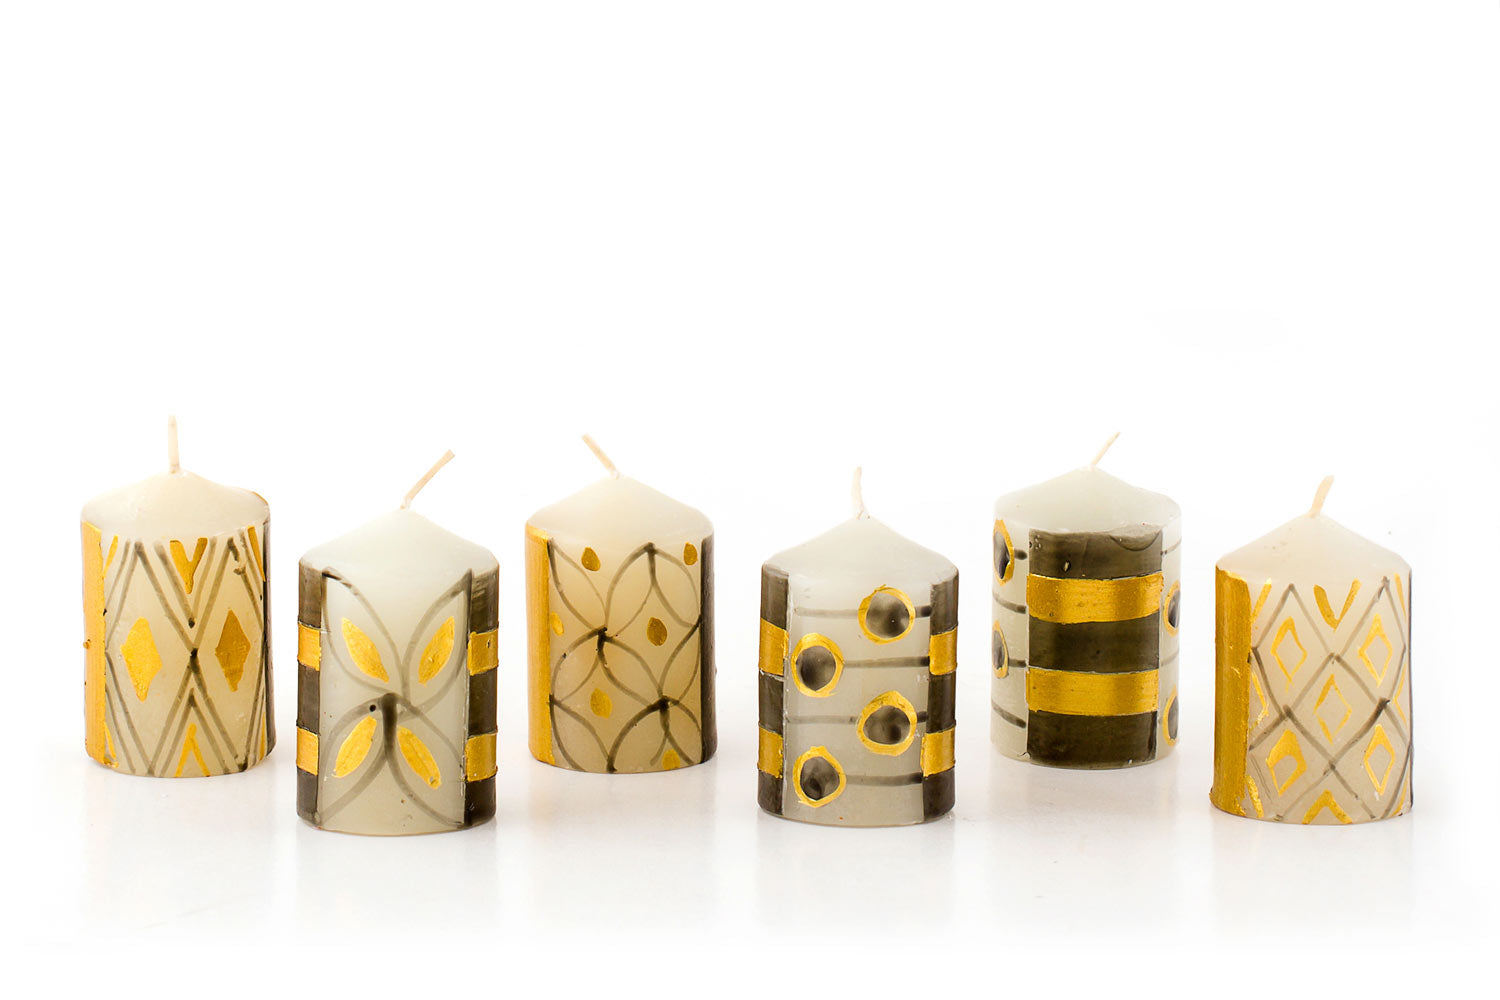 Celebration design votive candles. white background with grey/black and gold designs of stripes, dots, and floral. Fair Trade.